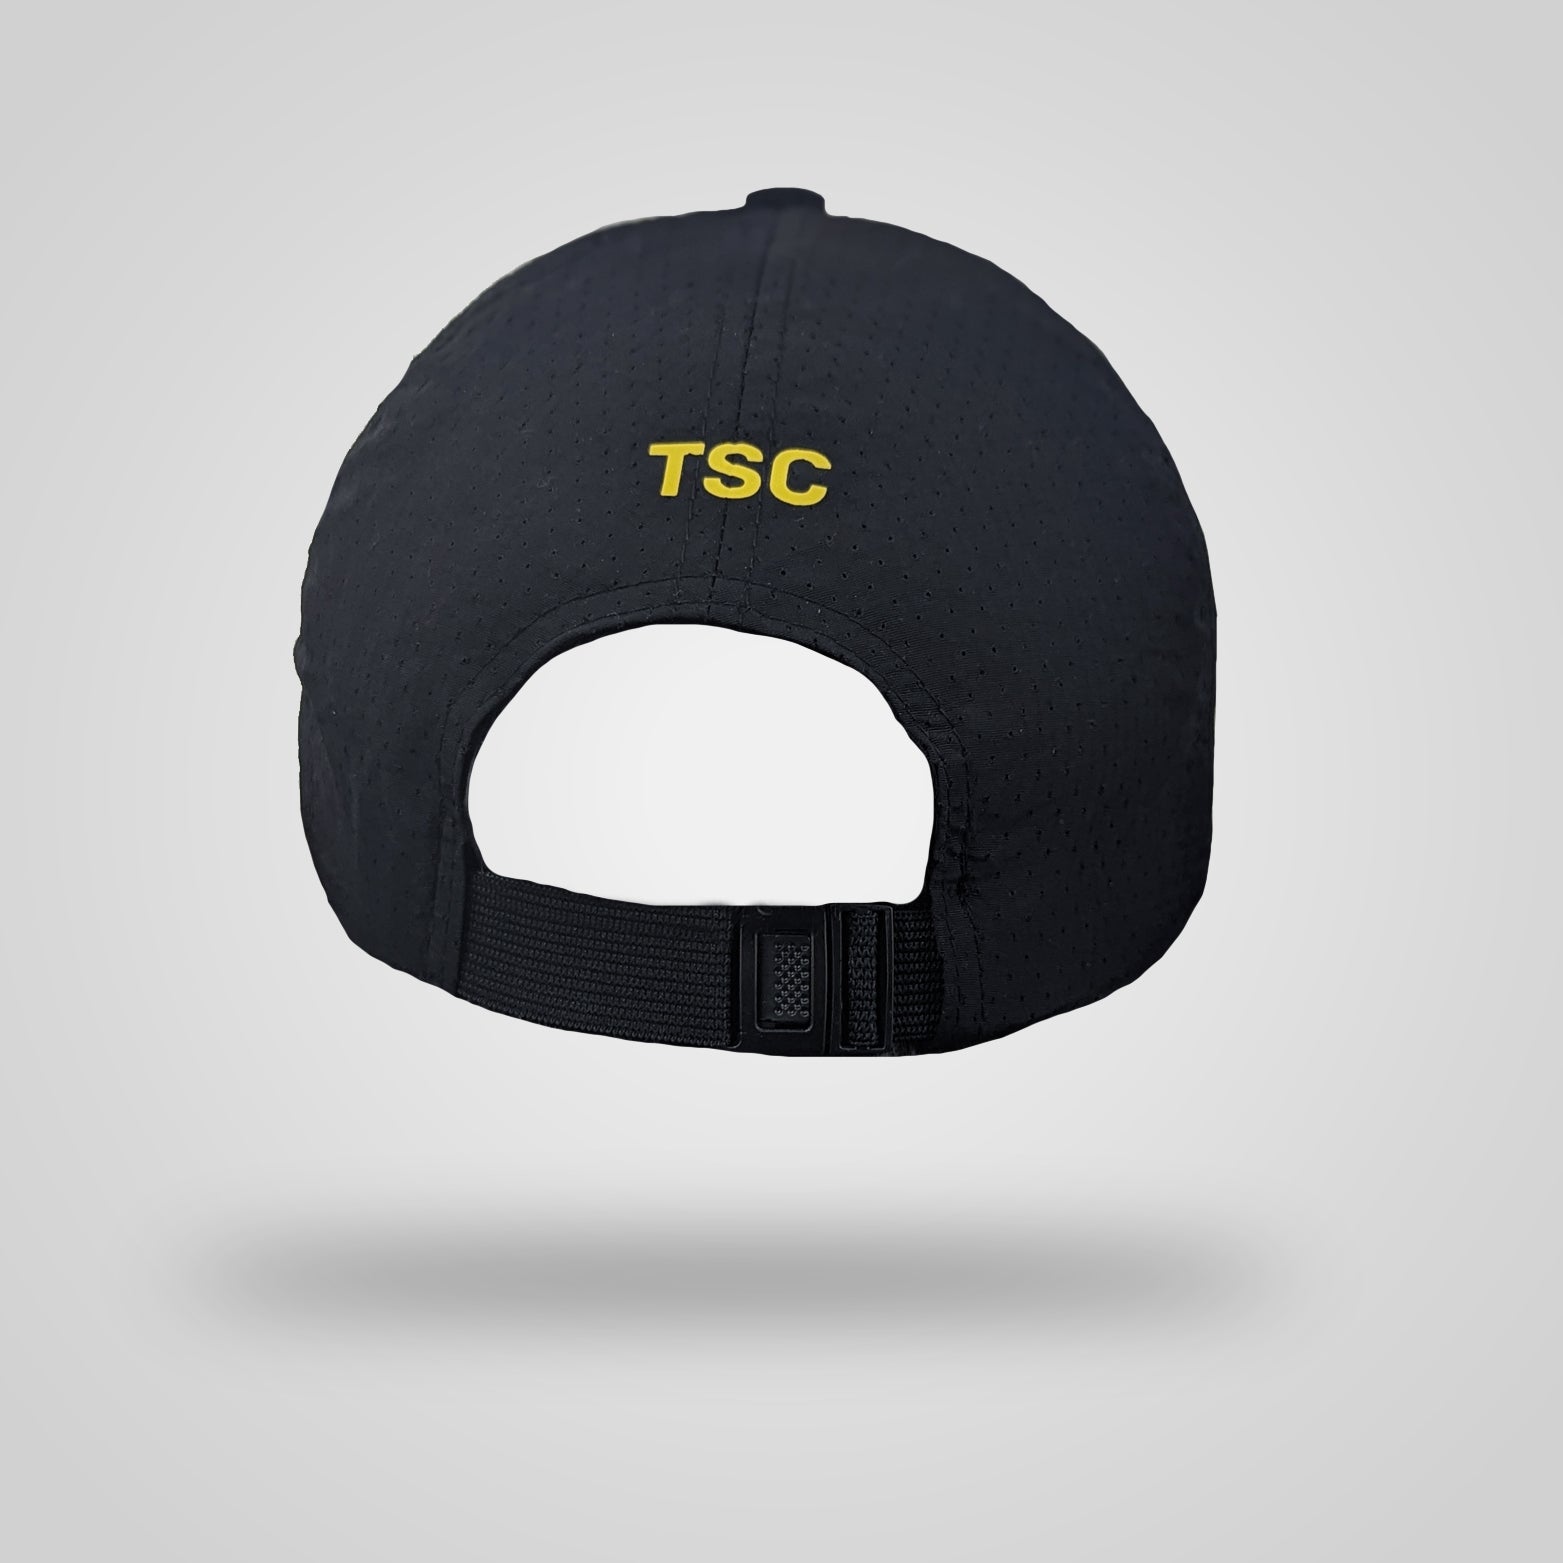 online store sports equipment - top shop sports brands - buy online caps  - top sports brand for caps - latest sports caps  in united states